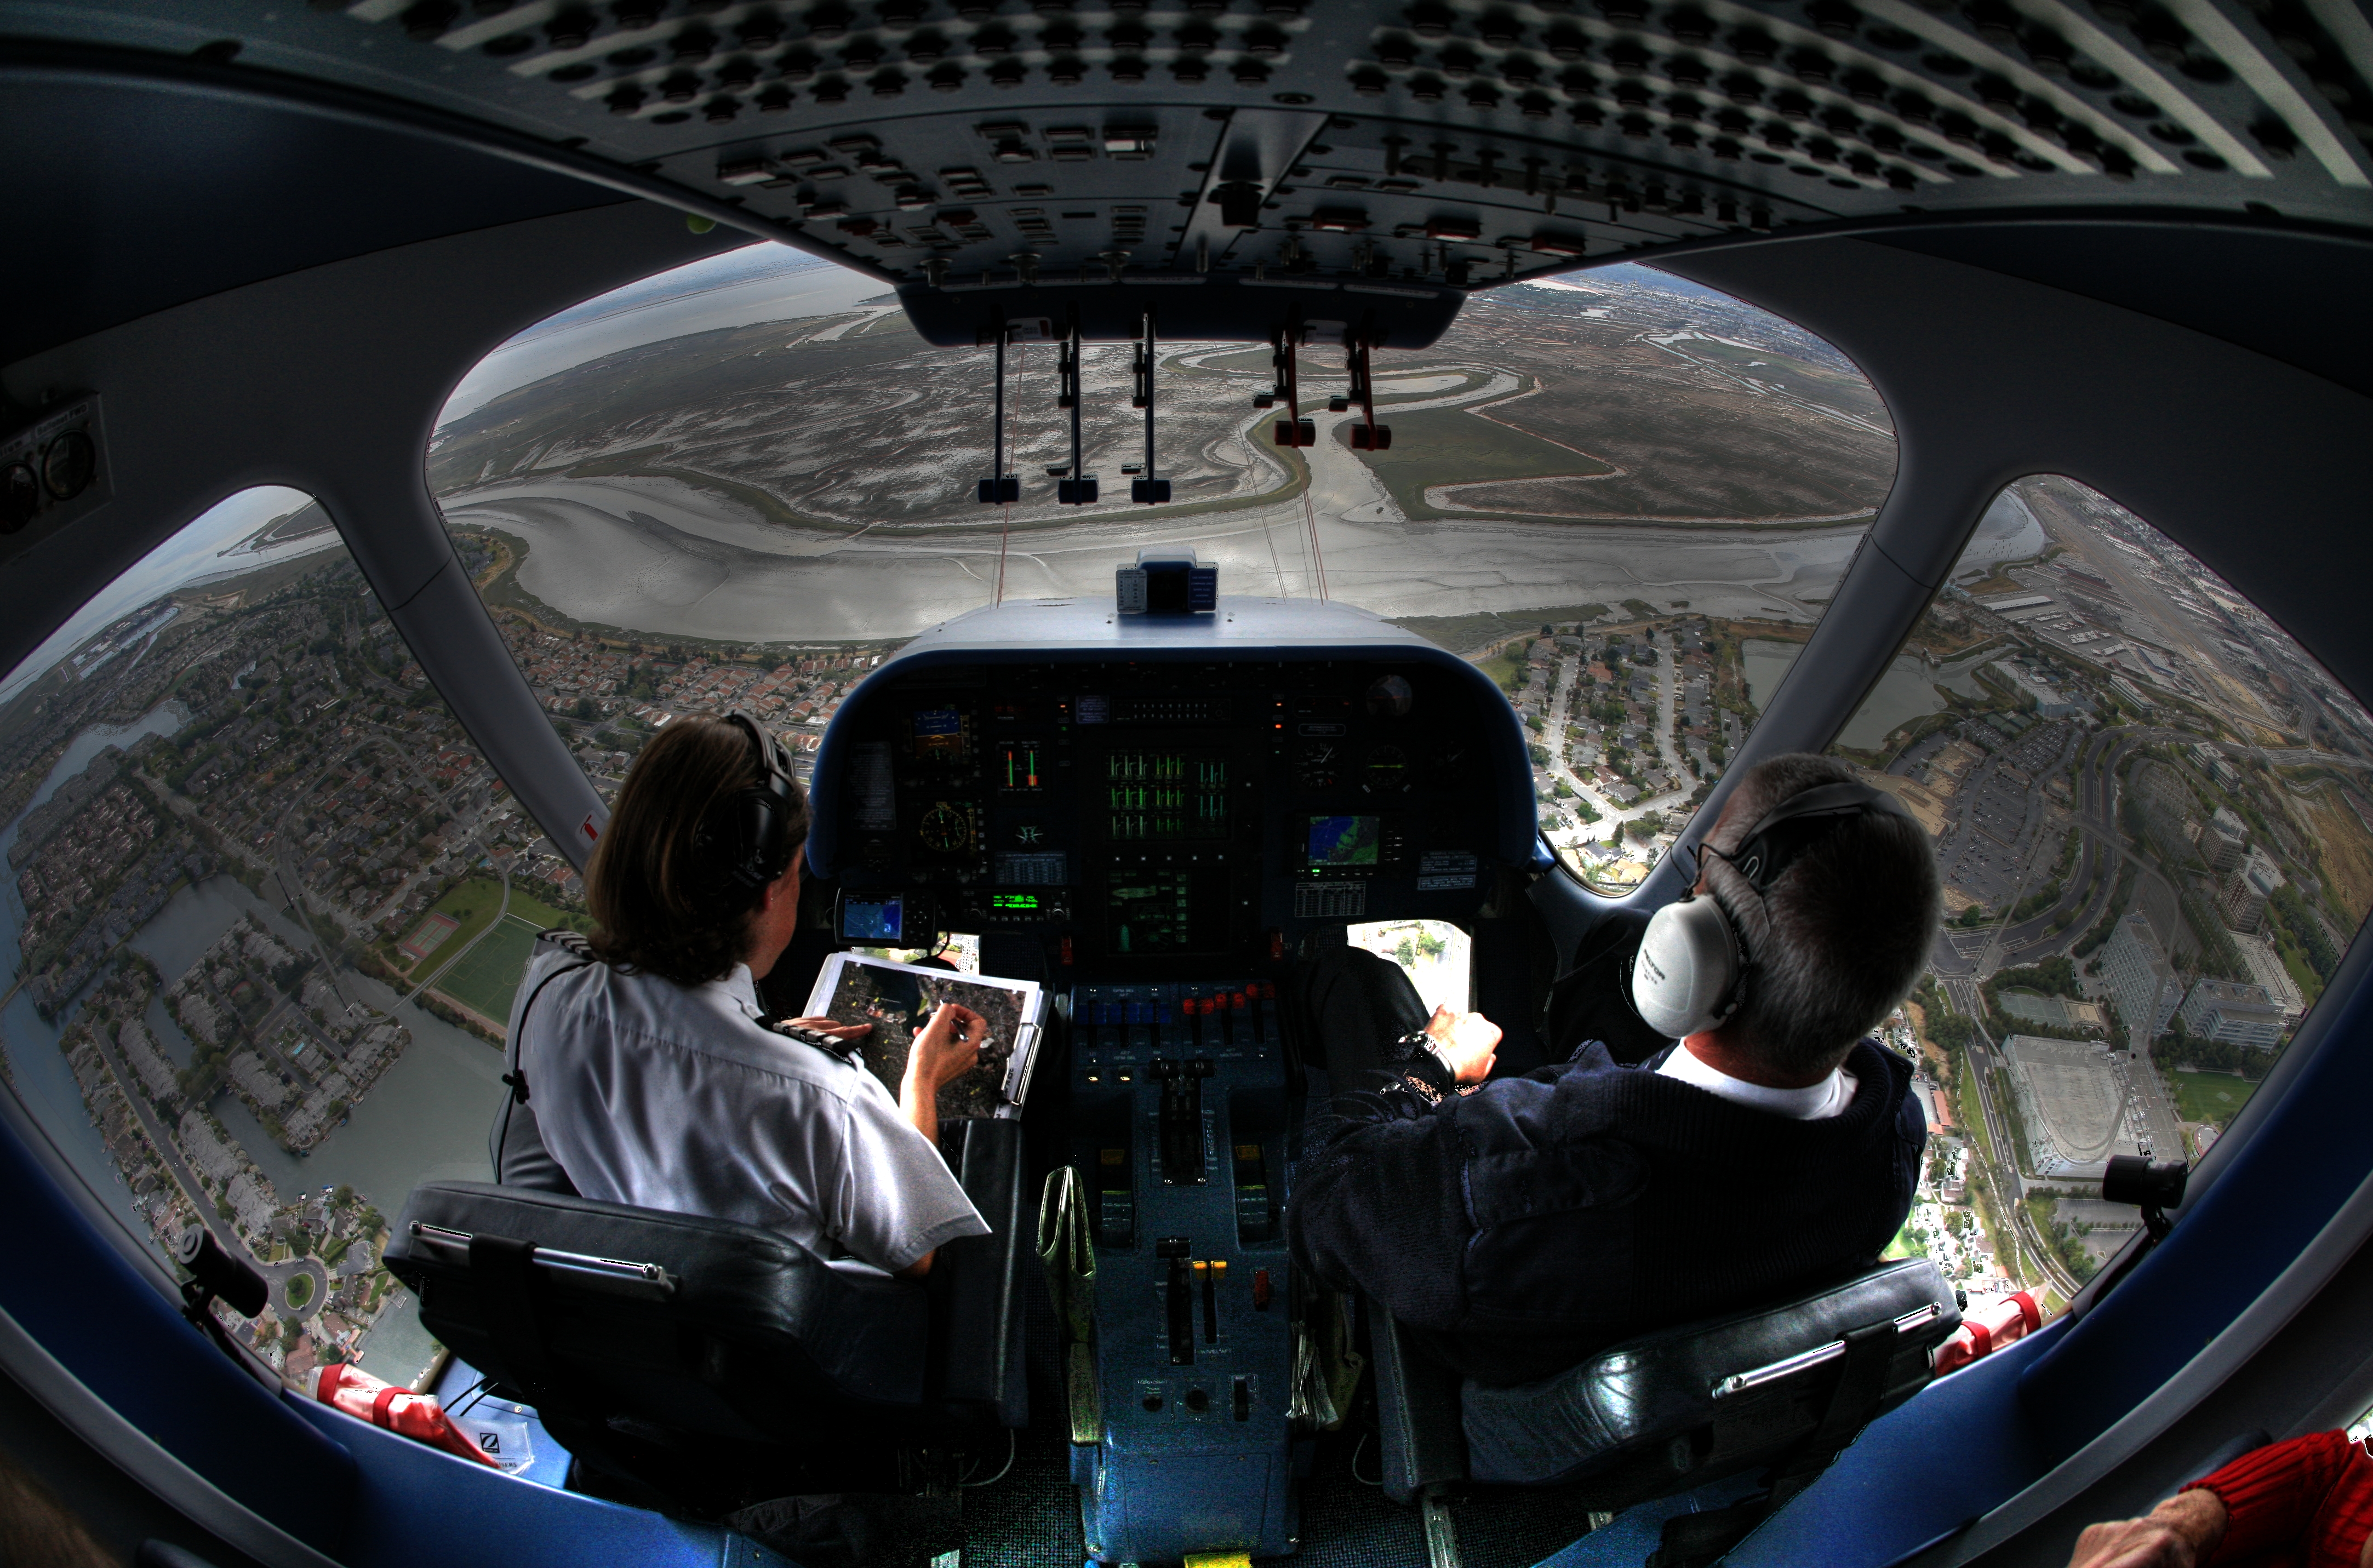 View from a blimp's cockpit during flight.